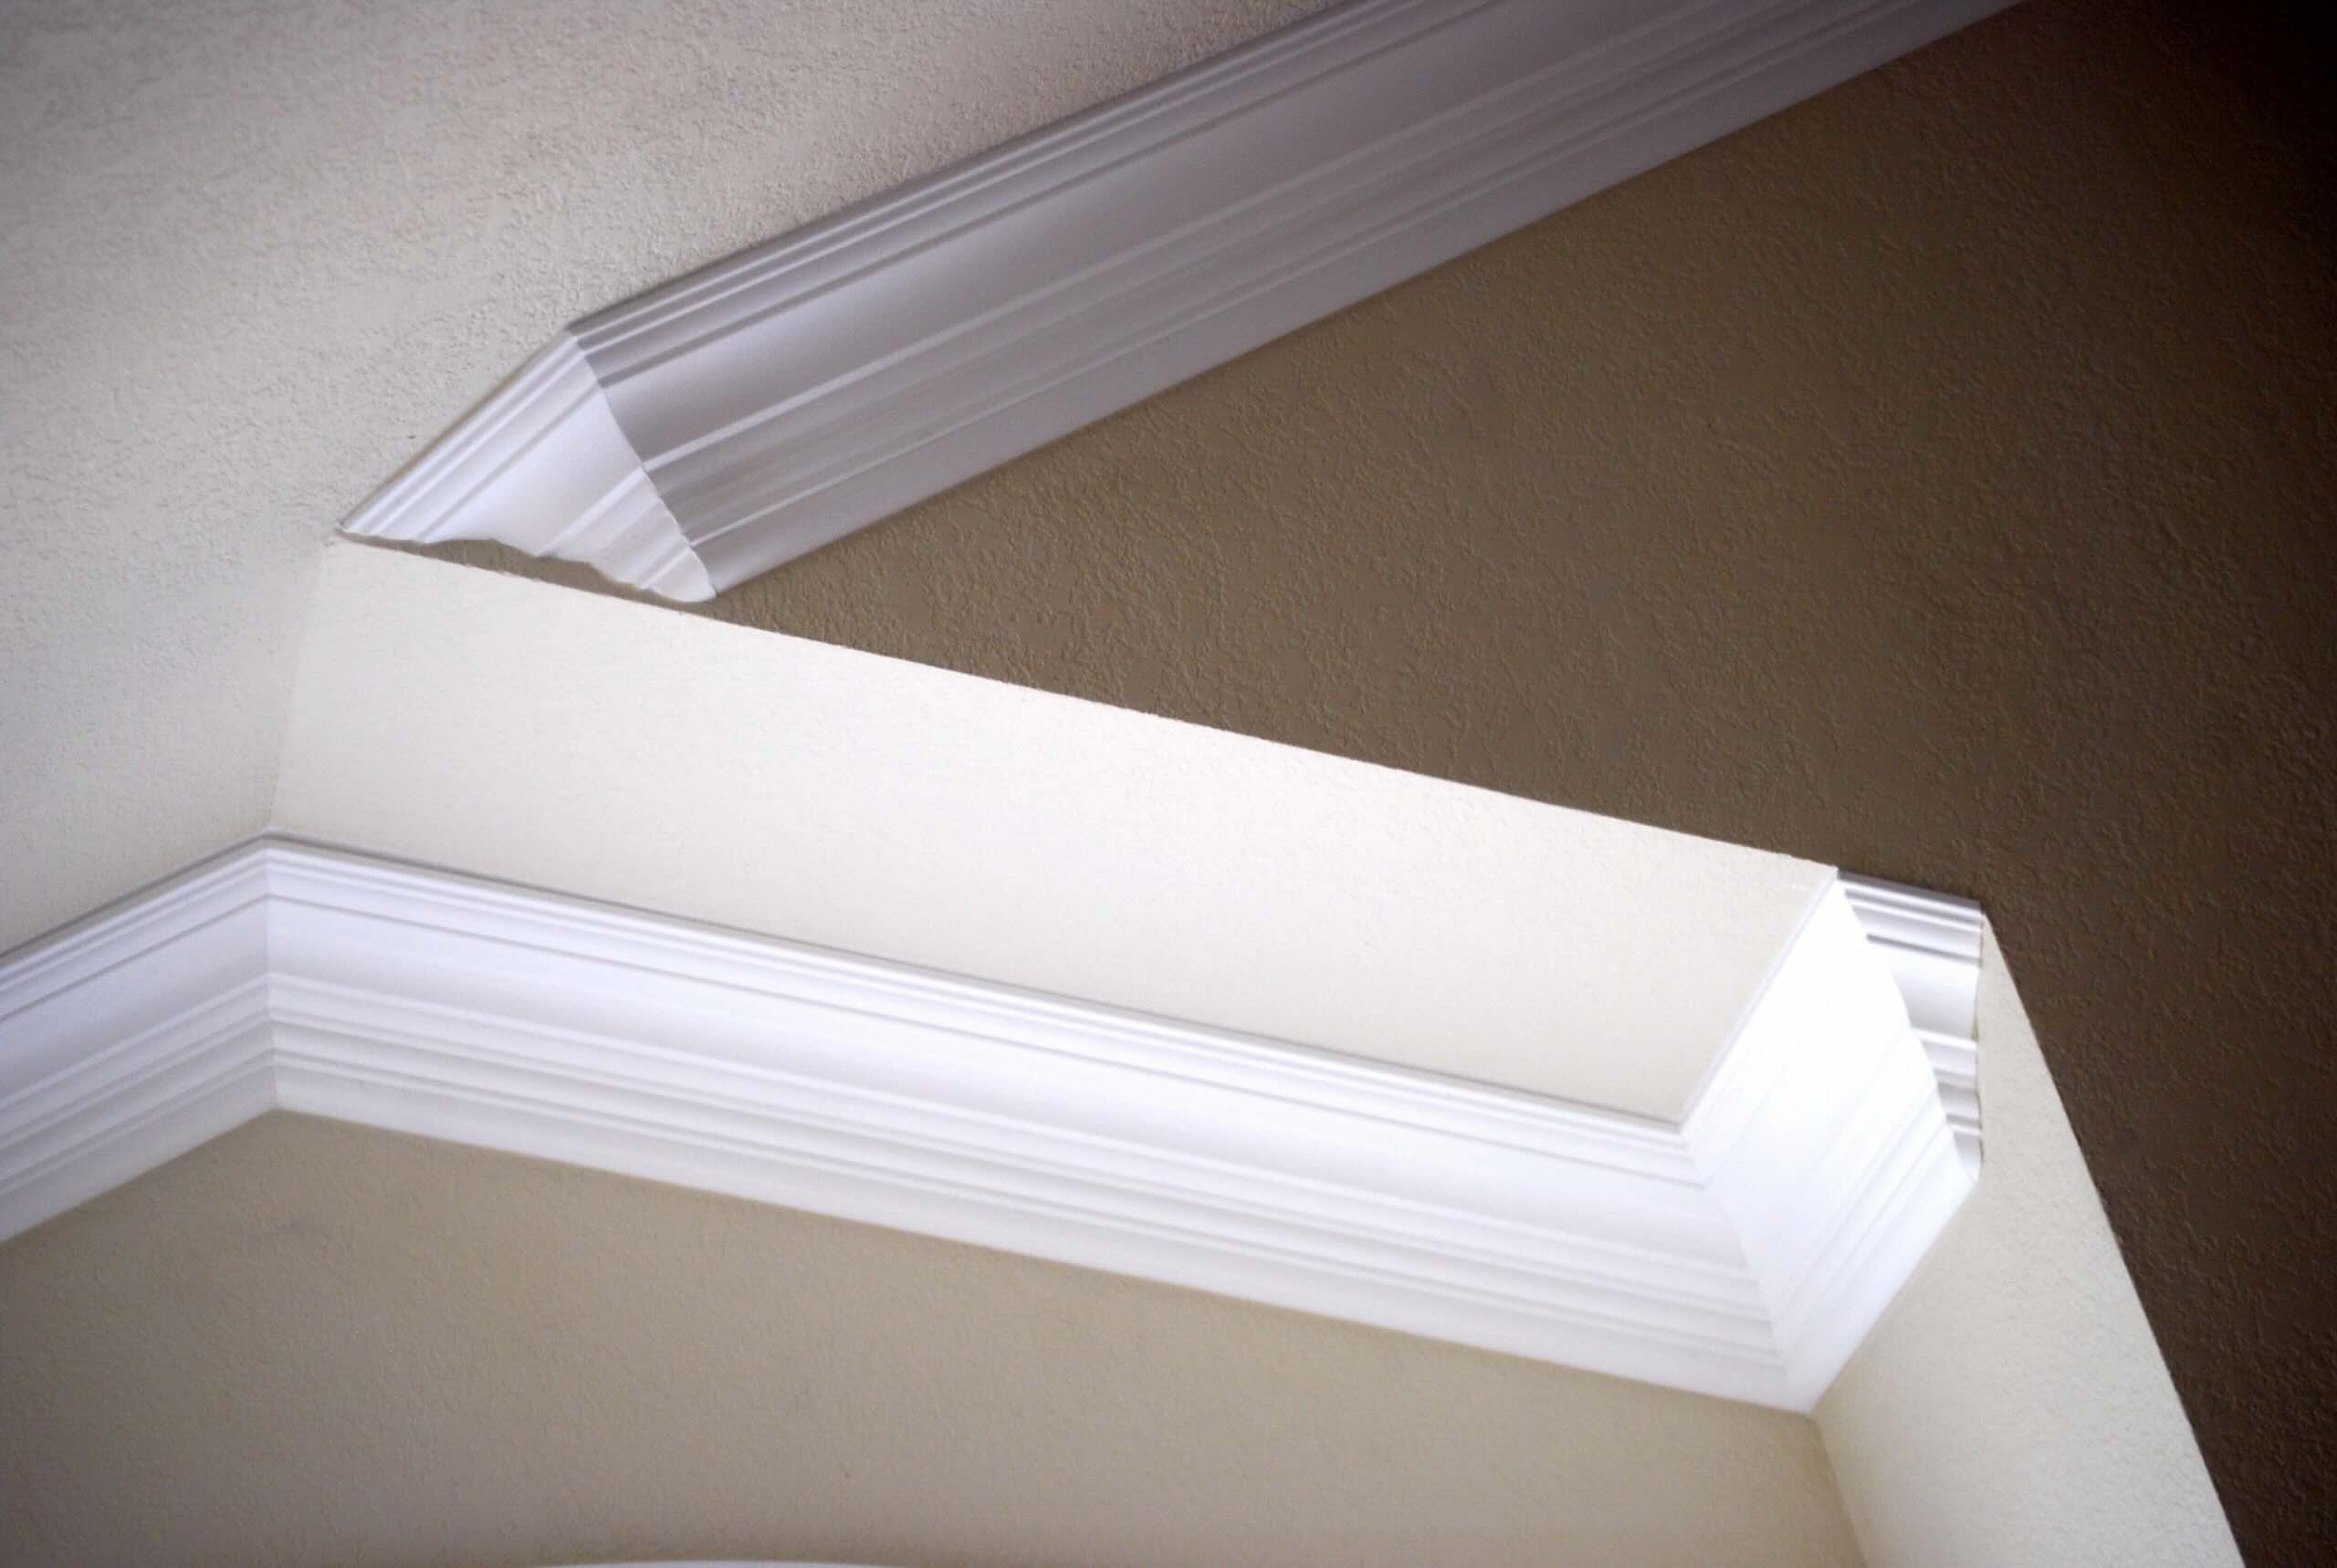 How To Install Crown Molding On A Vaulted Ceiling